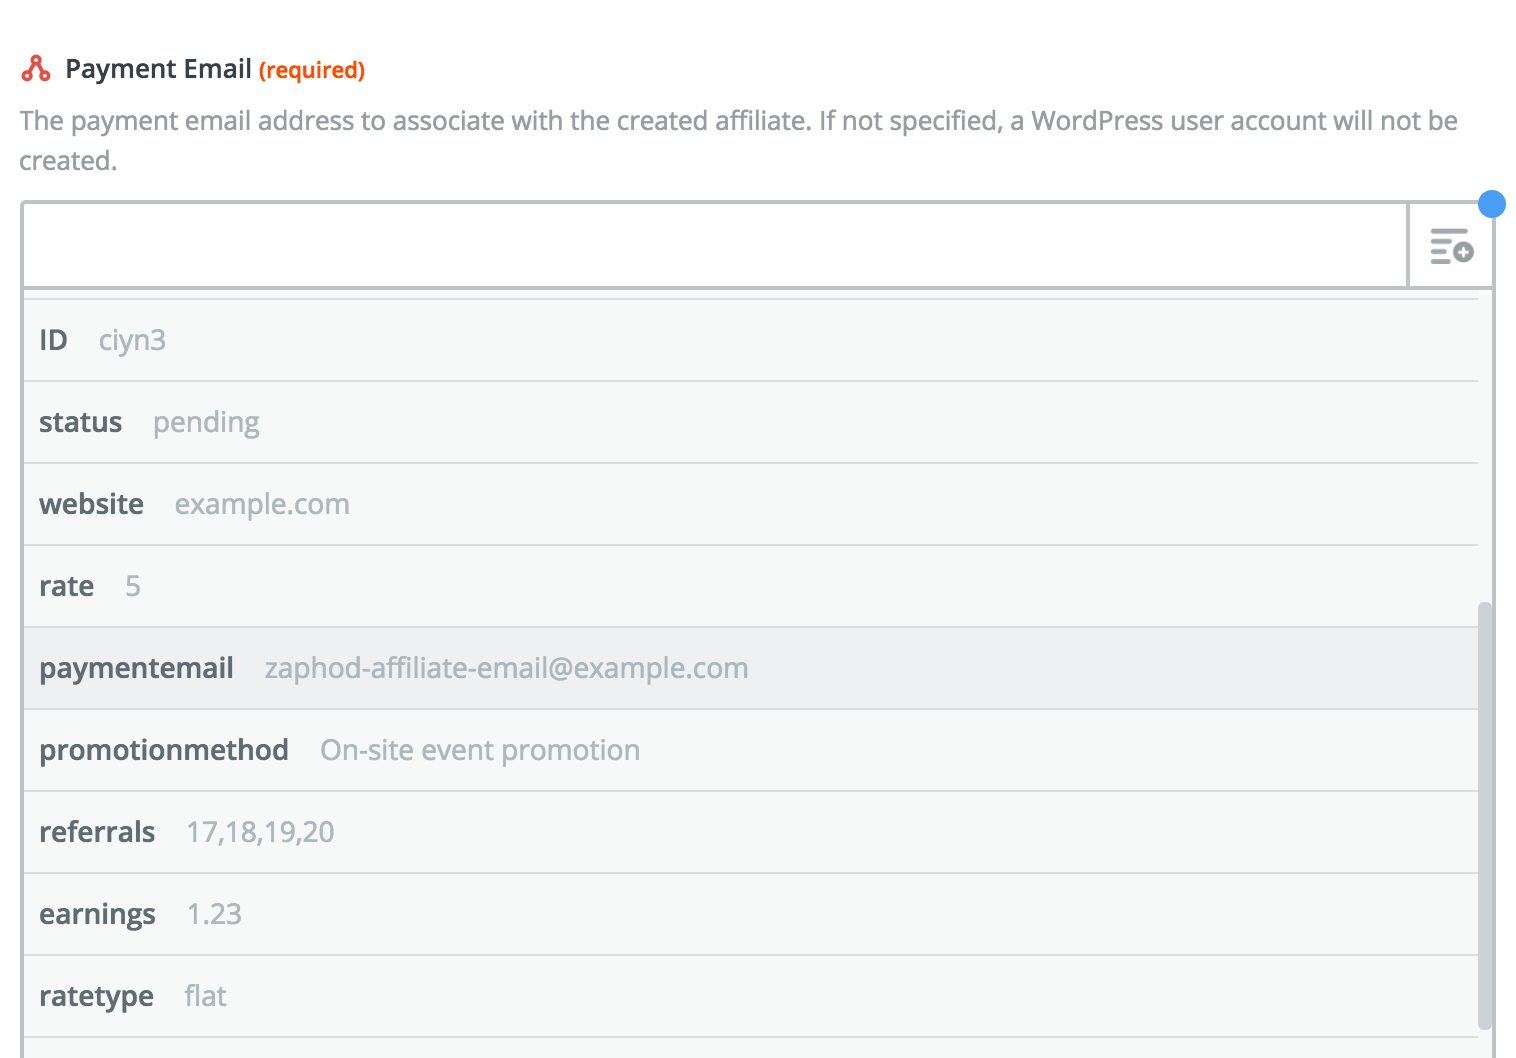 The affiliate payment email is required when creating affiliates via Zapier.